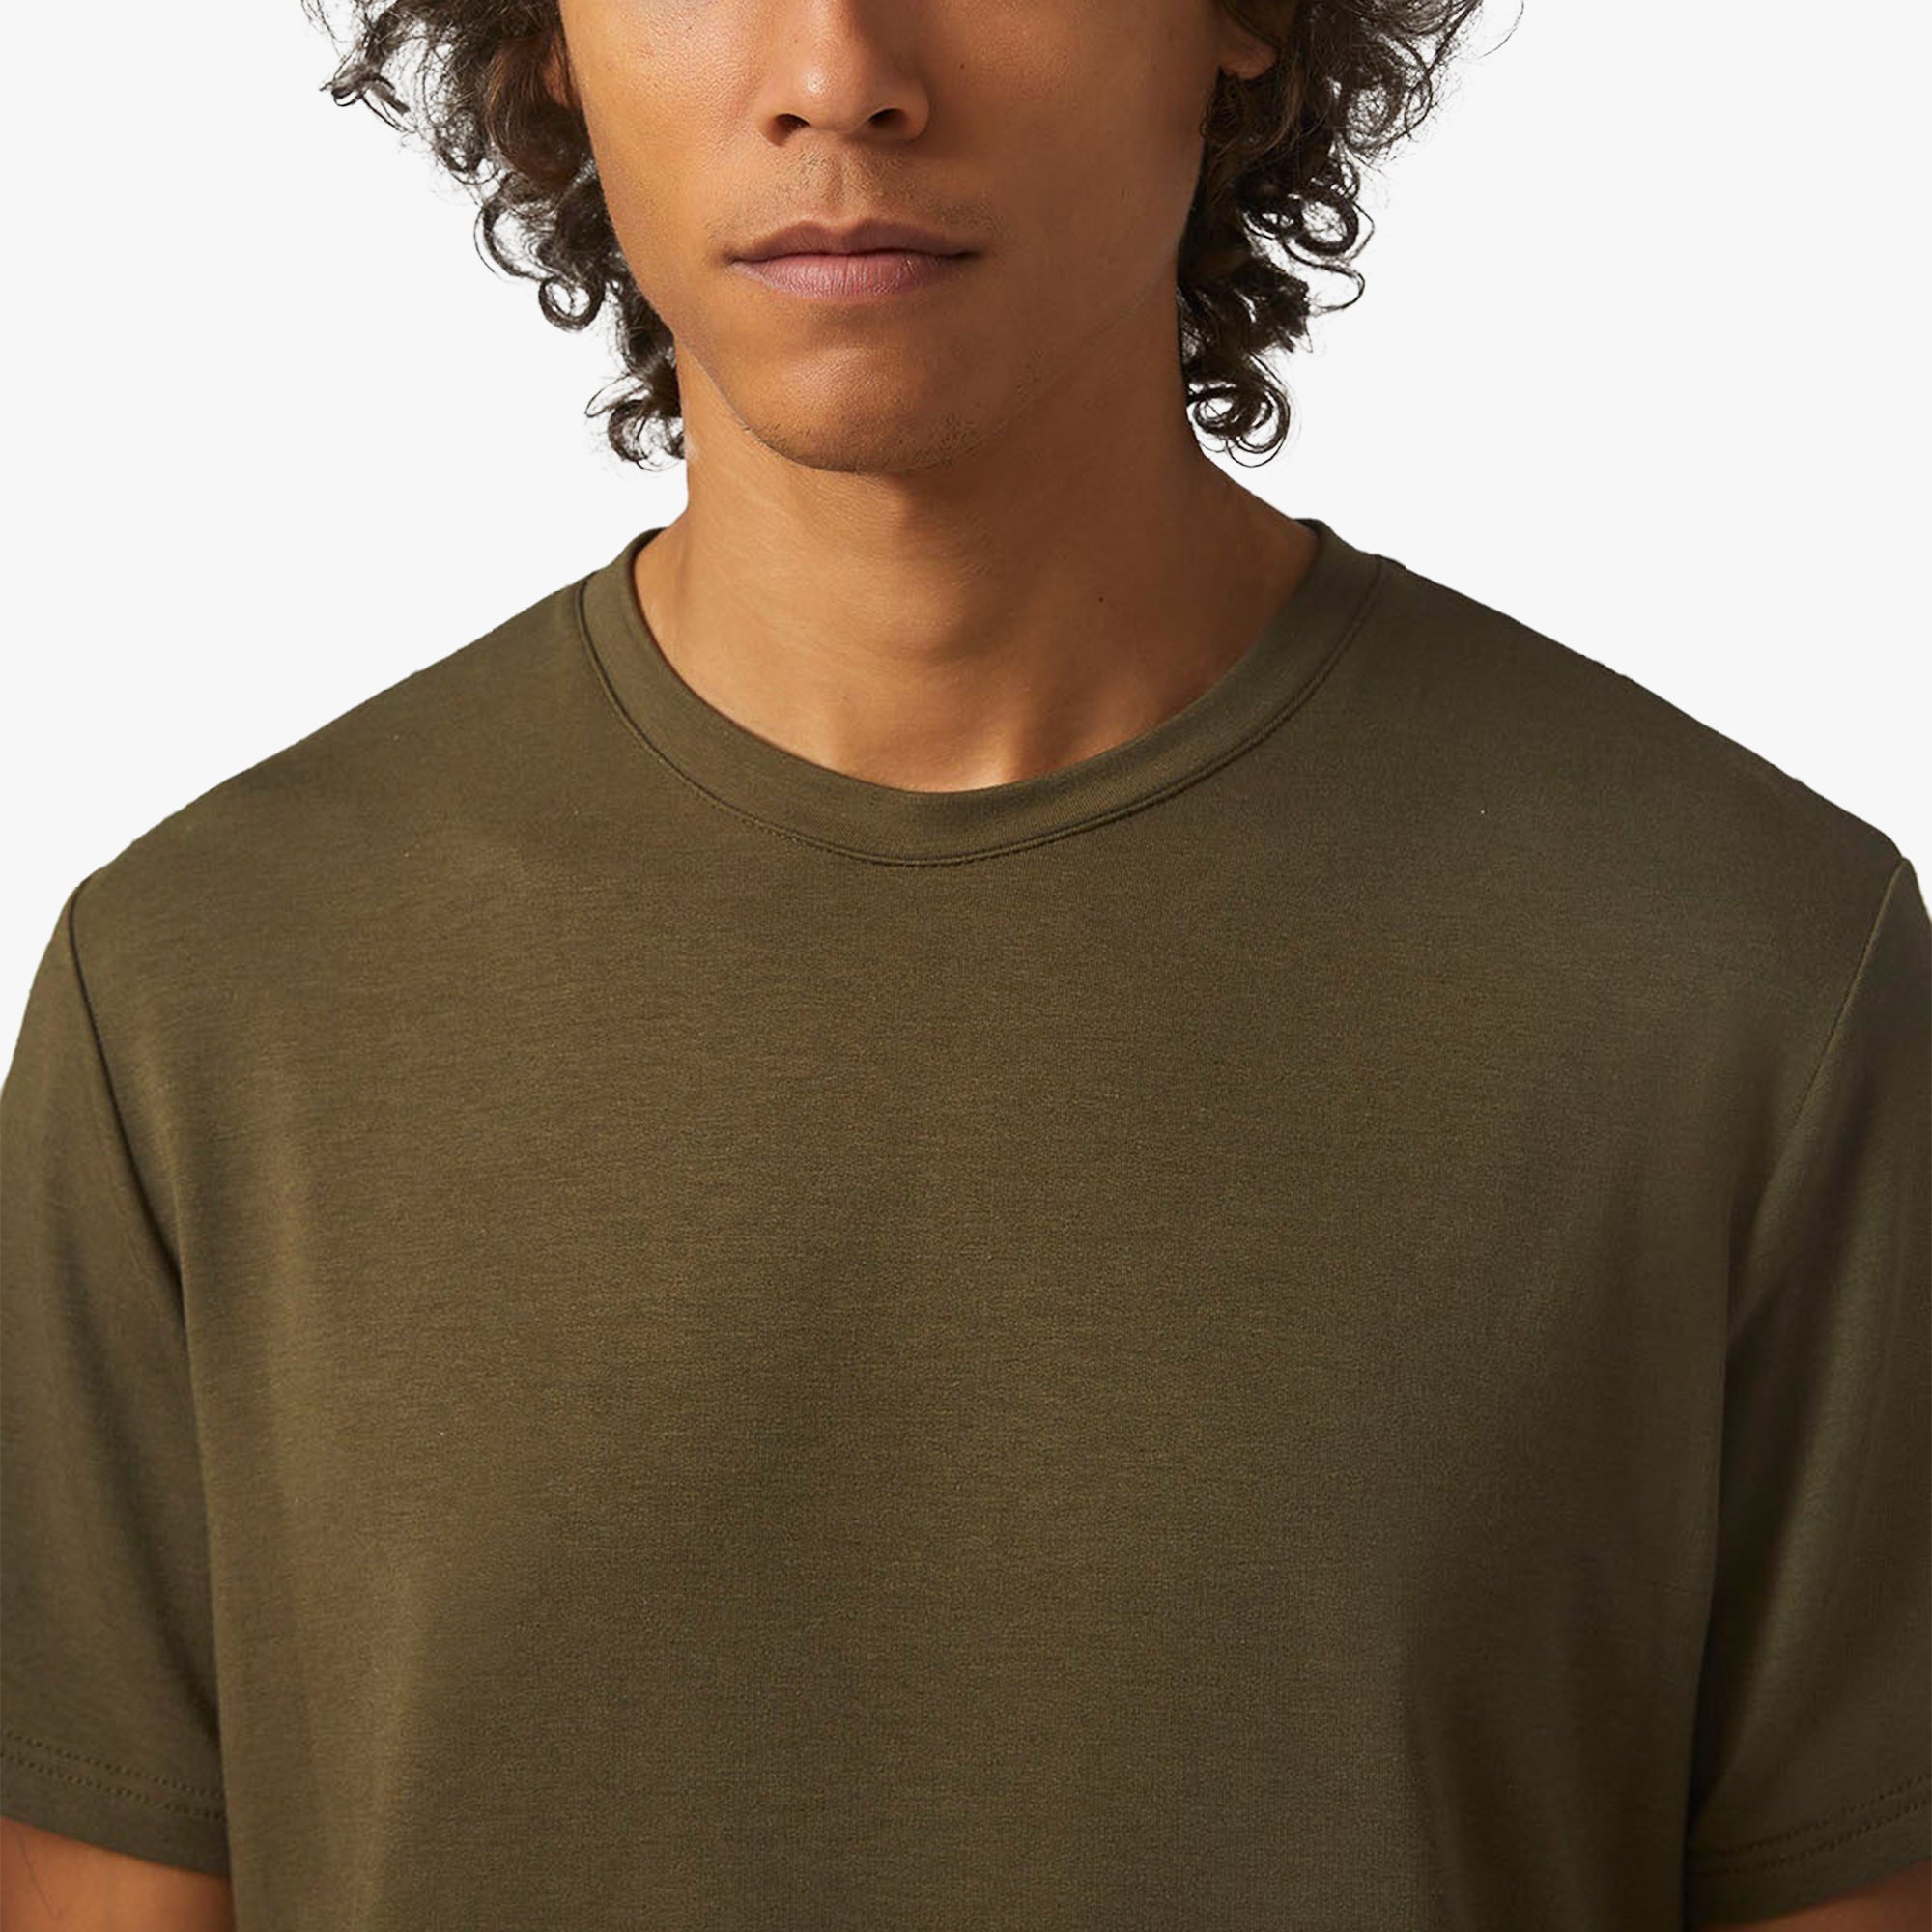 Adesso Man Bamboo T-Shirt - Olive